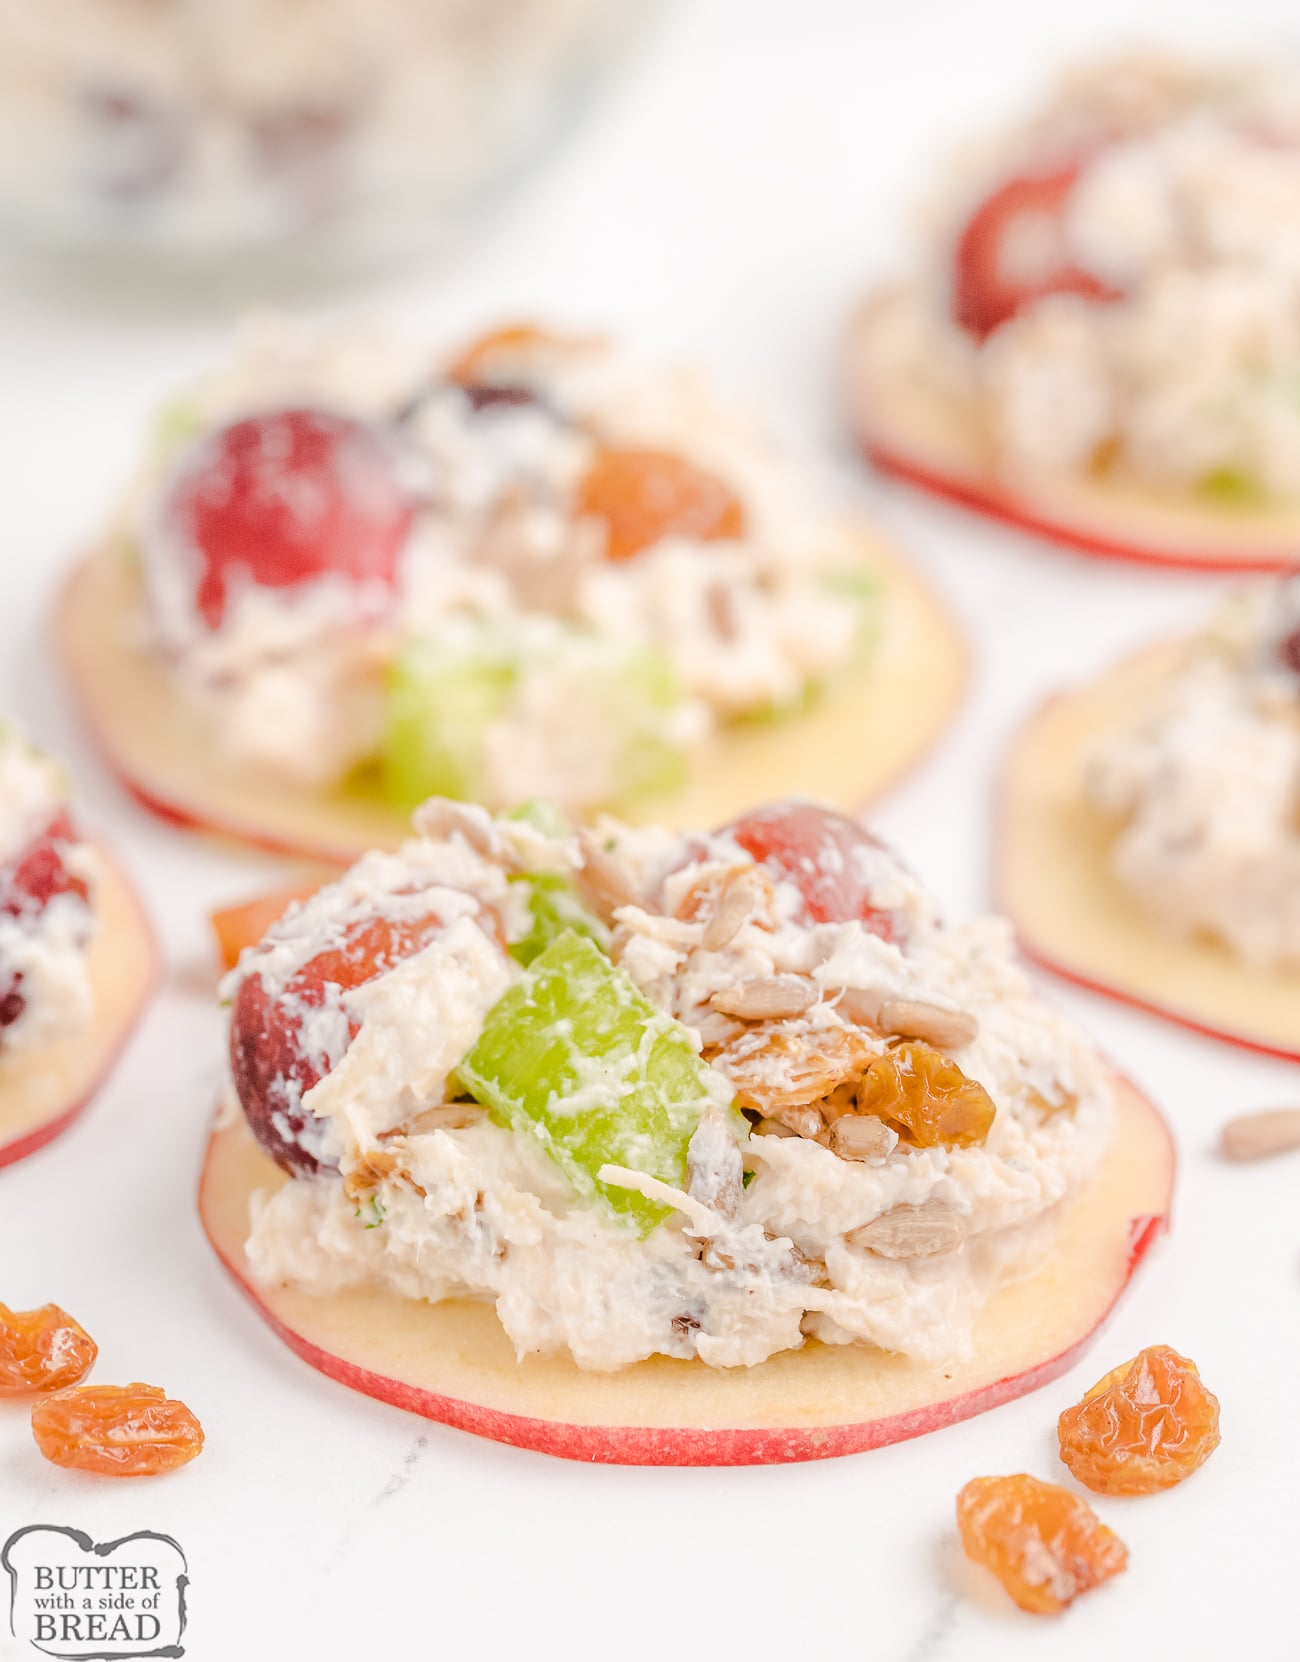 chicken salad on apple slices for lunch or a snack